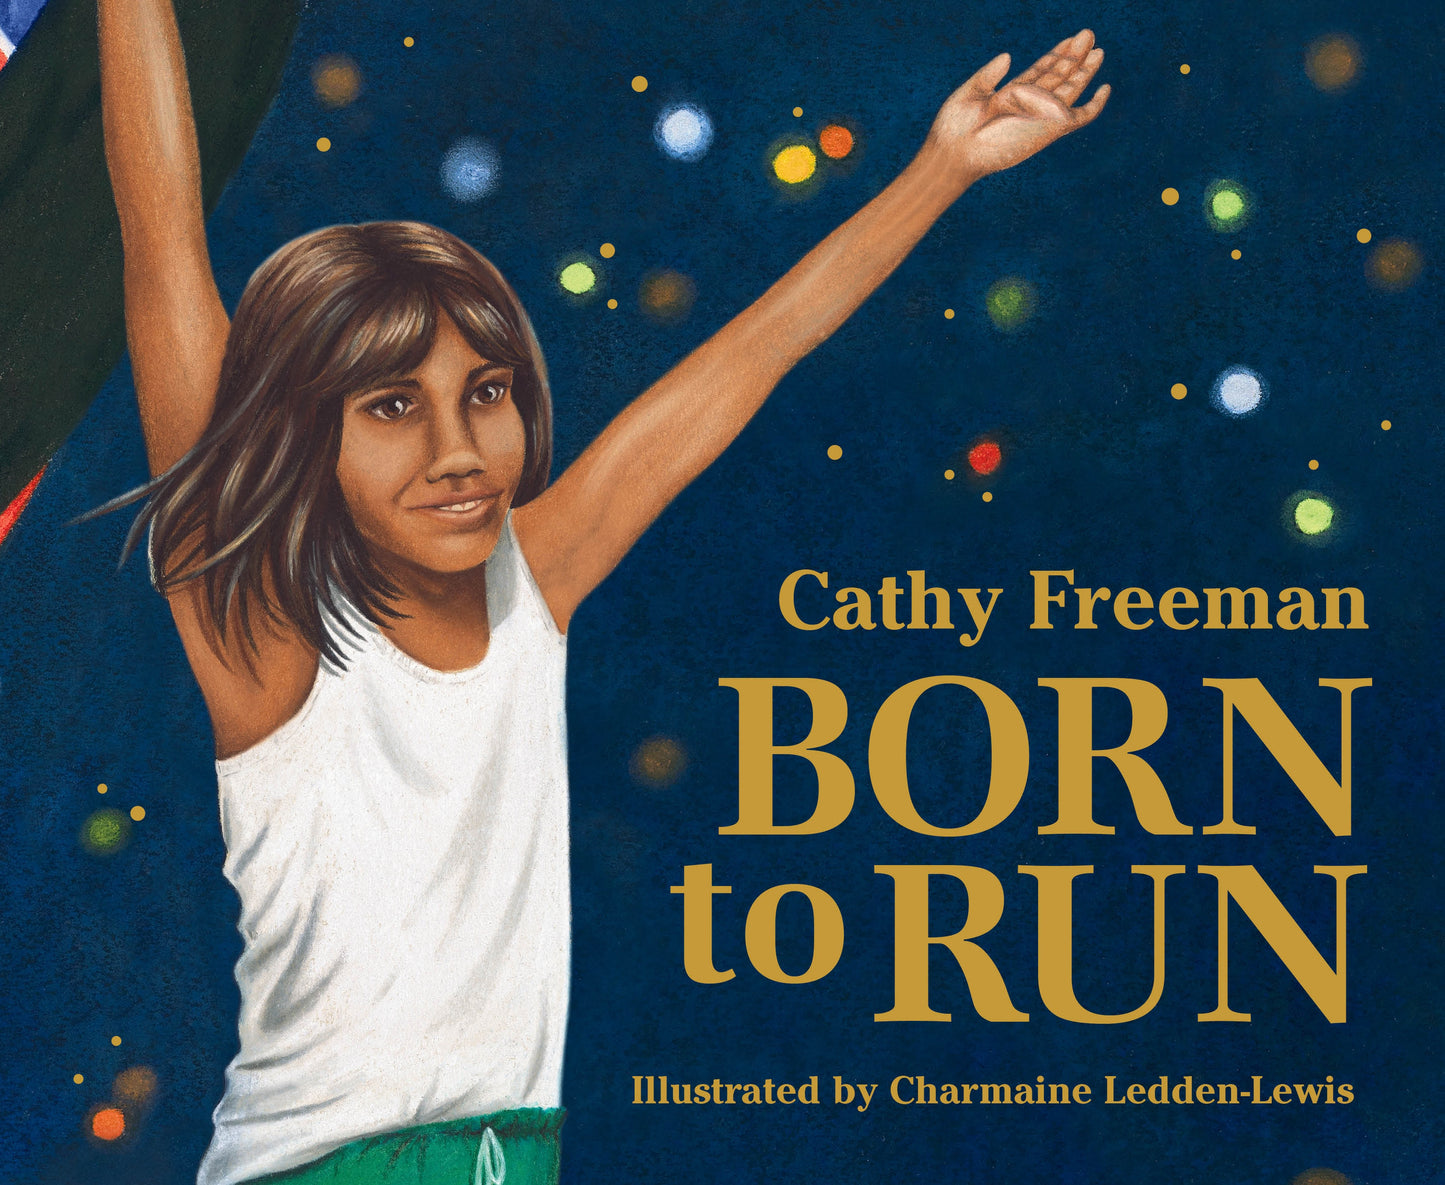 Born to Run by Cathy Freeman and Charmaine Ledden-Lewis